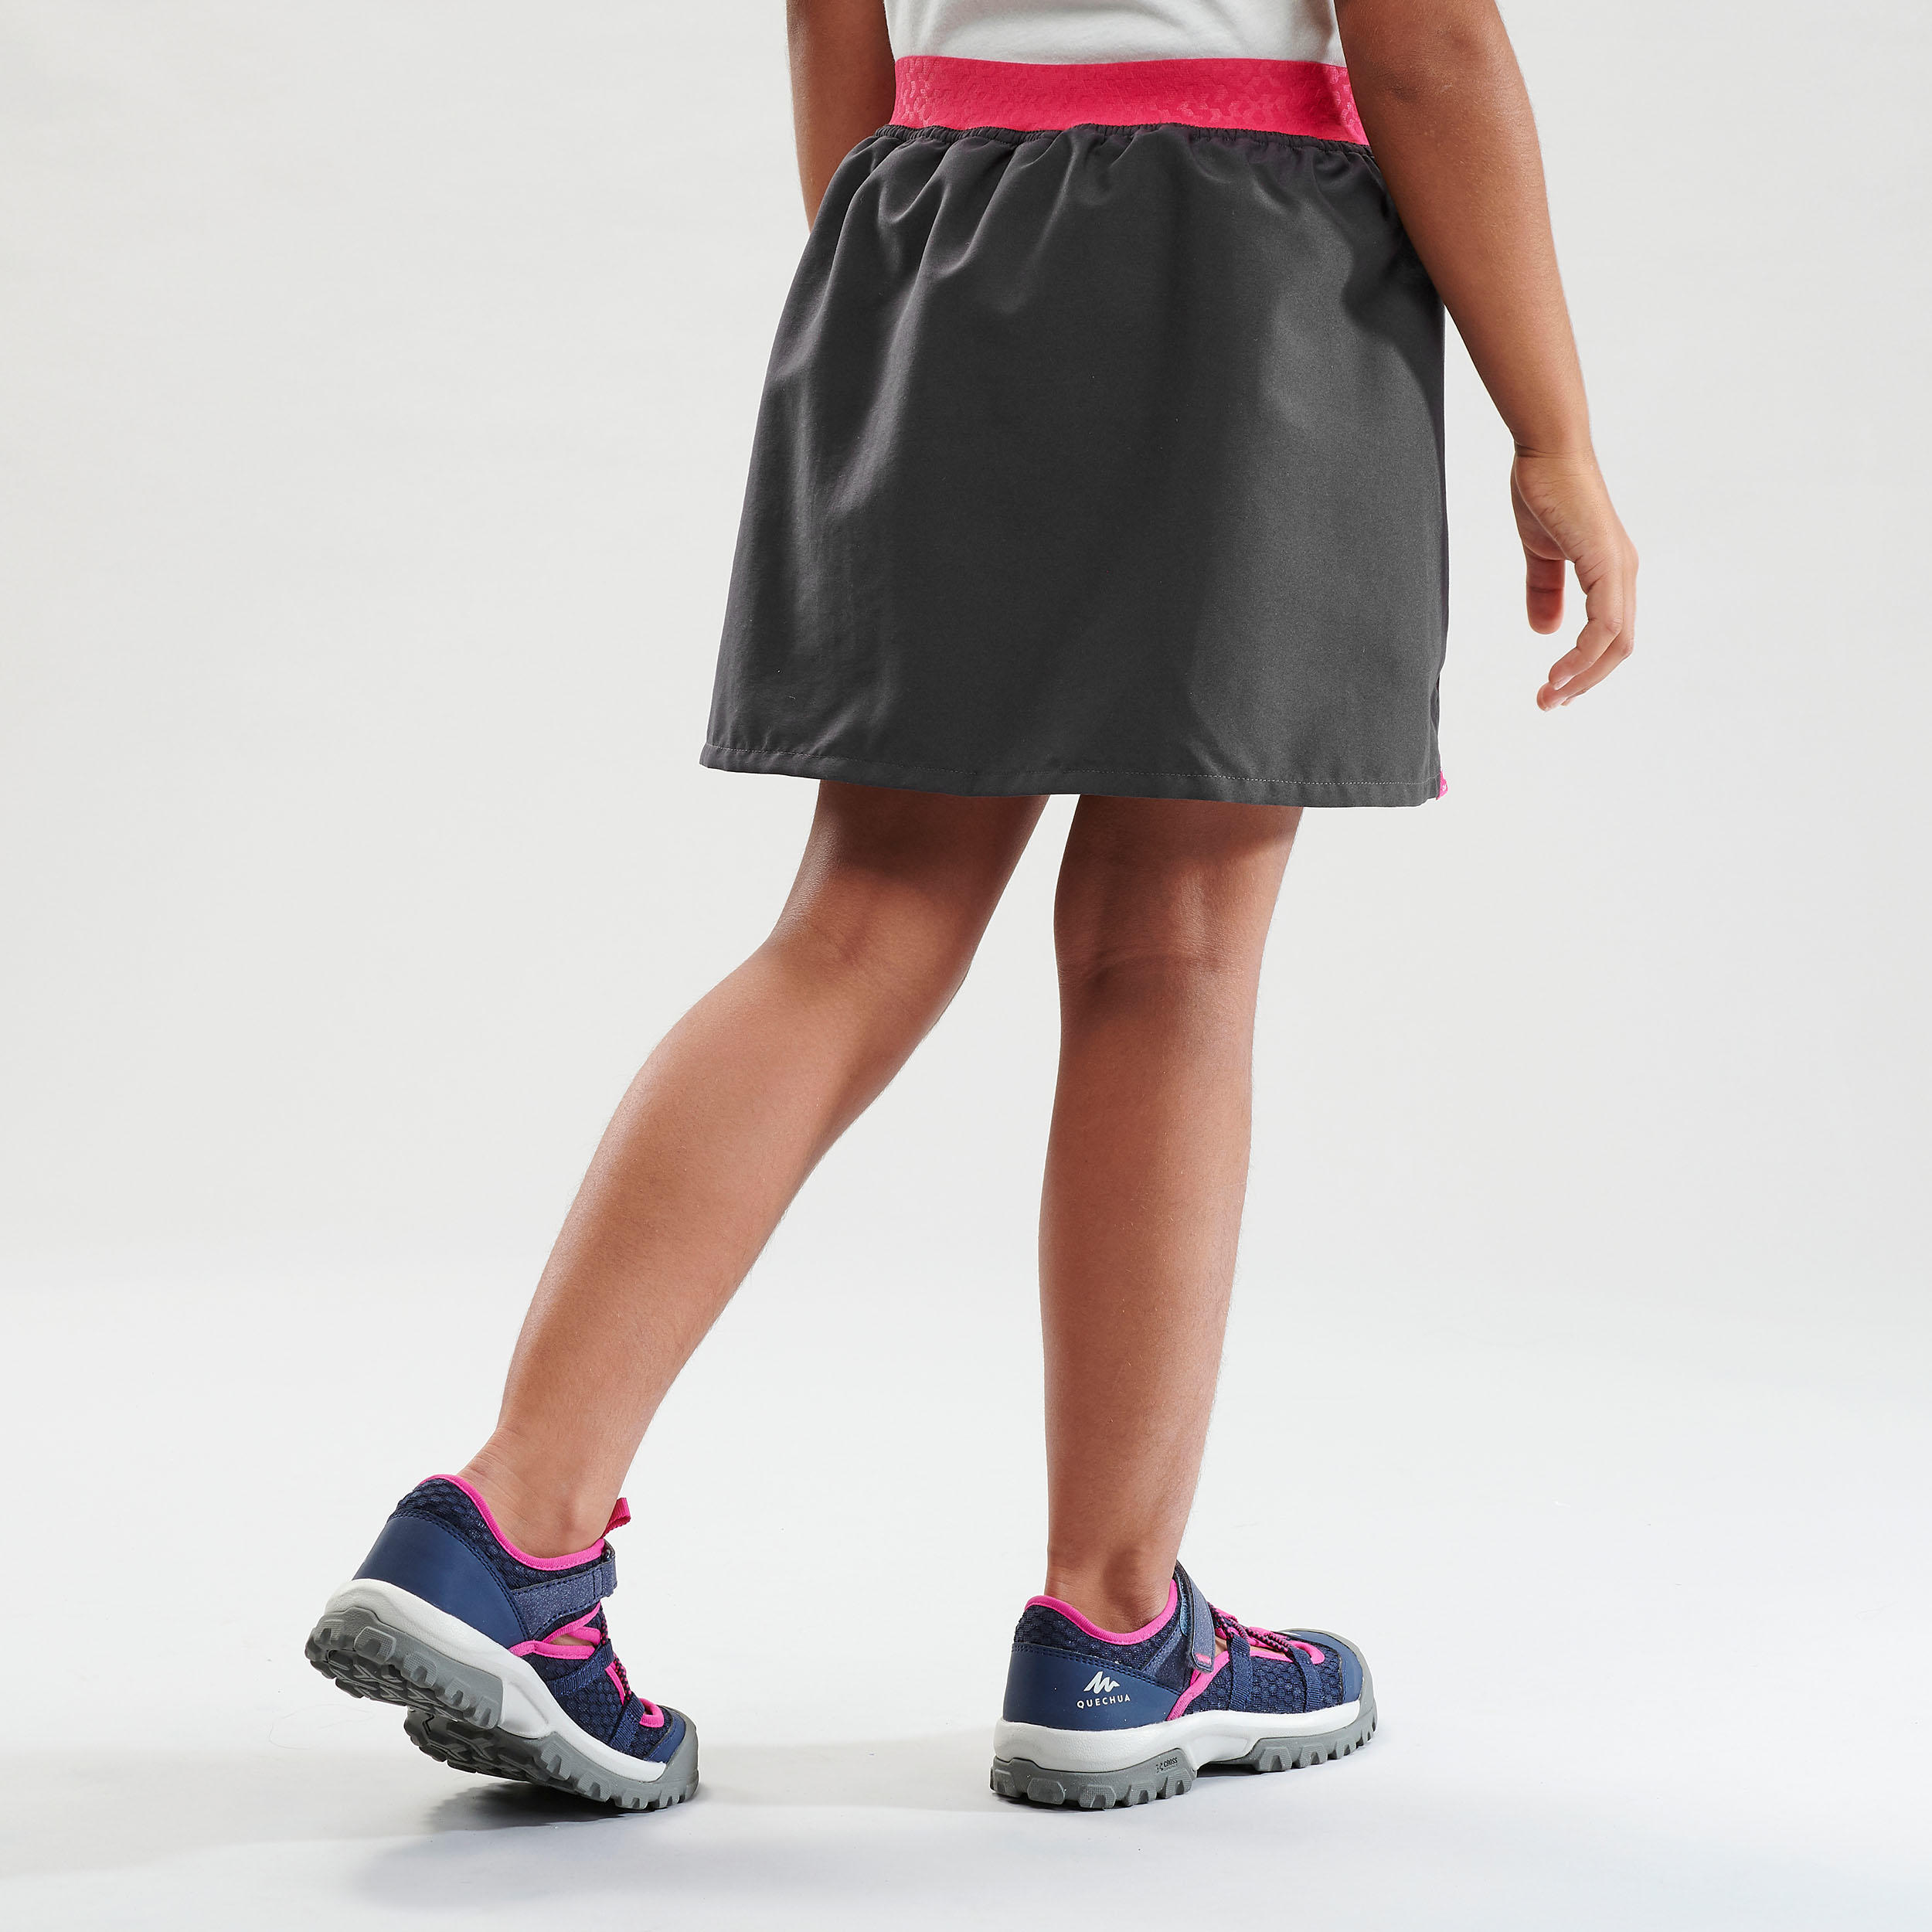 Kid's Hiking skort - MH100 - grey and pink - ages 7-15 years 3/6